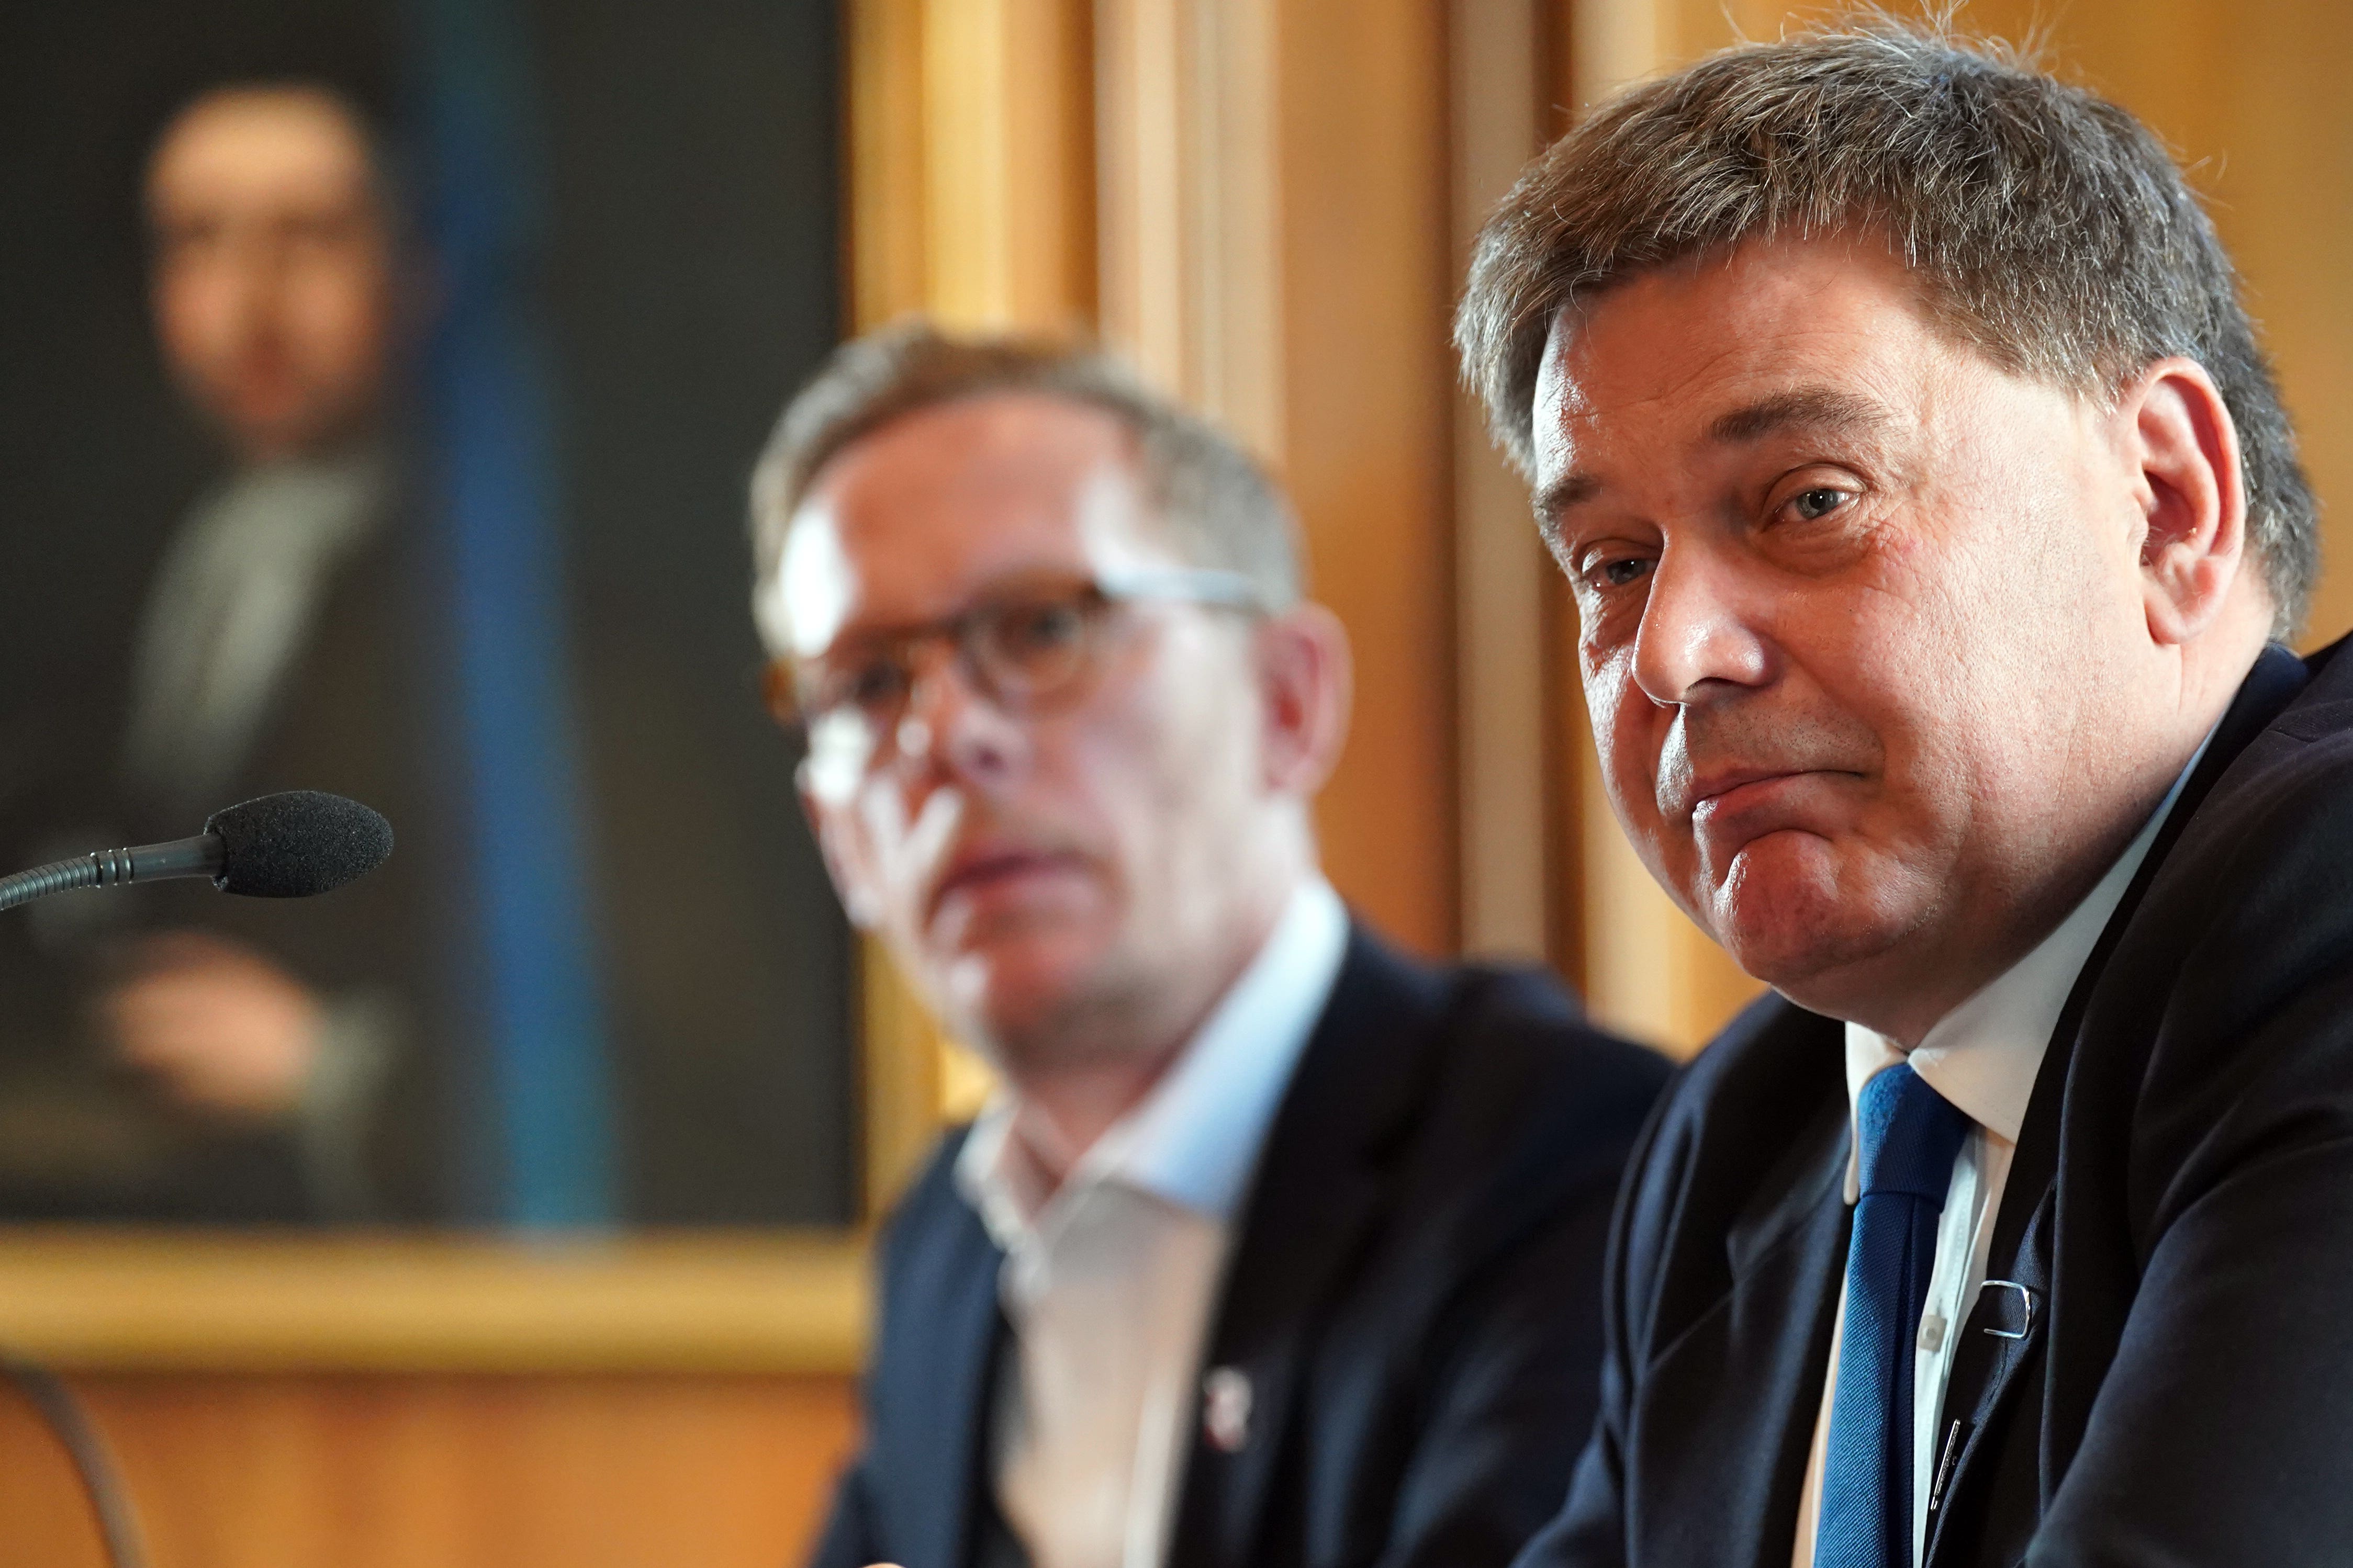 Mr Bridgen was kicked out of the Tory party after he tweeted that the Covid-19 vaccination programme was ‘the biggest crime against humanity since the Holocaust’